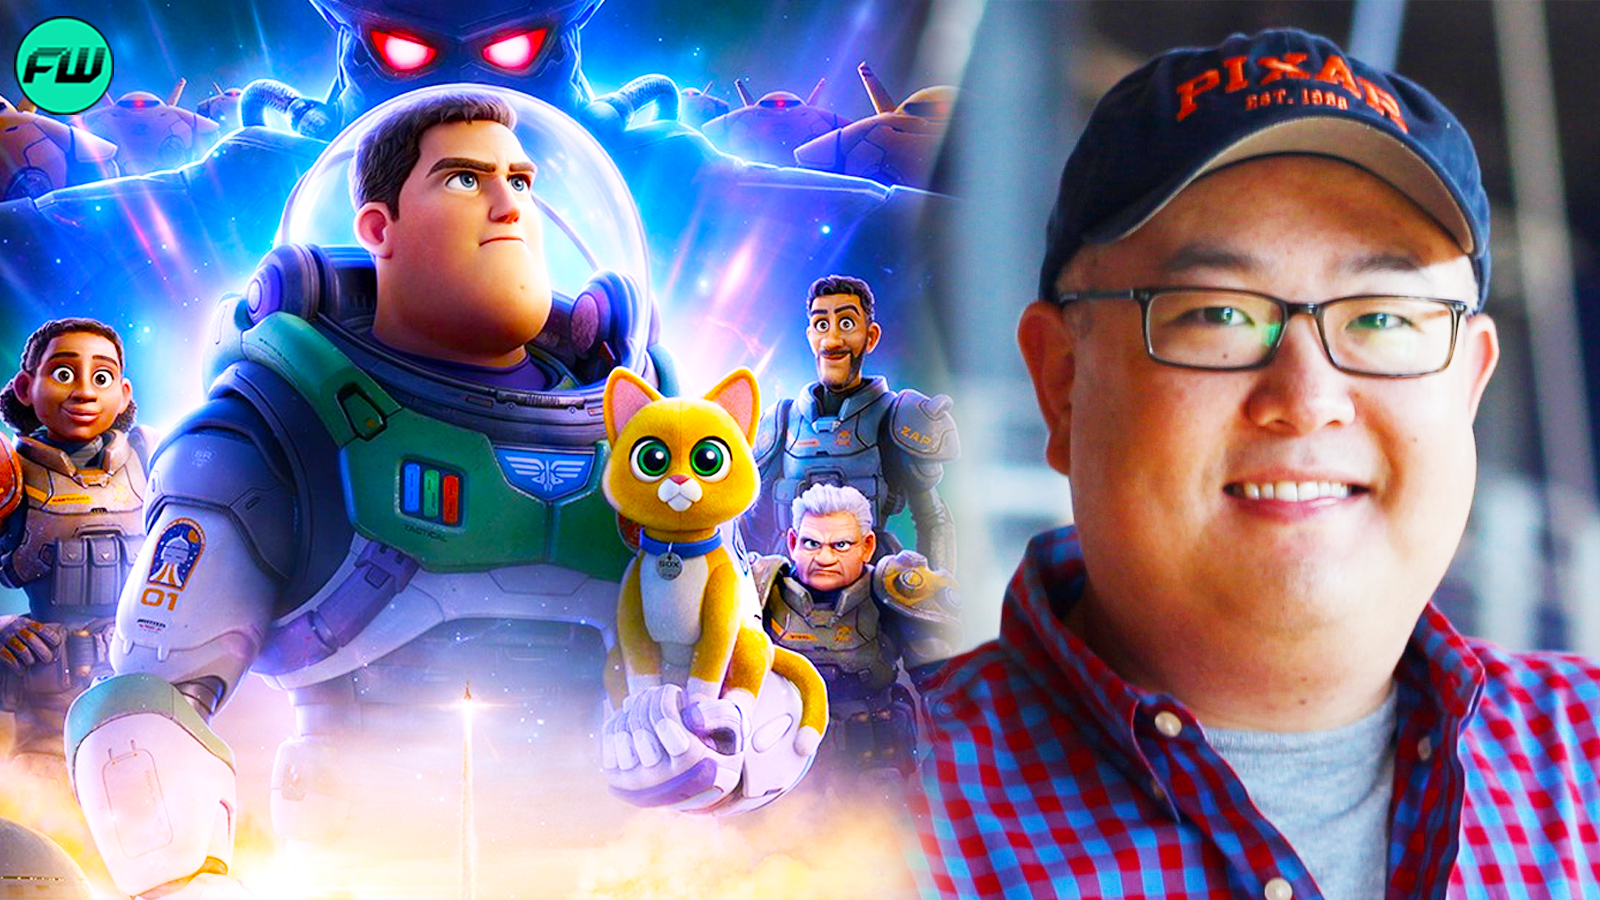 Lightyear: Peter Sohn On His Love For Sox, The Perfect Pixar Movie Night, & More